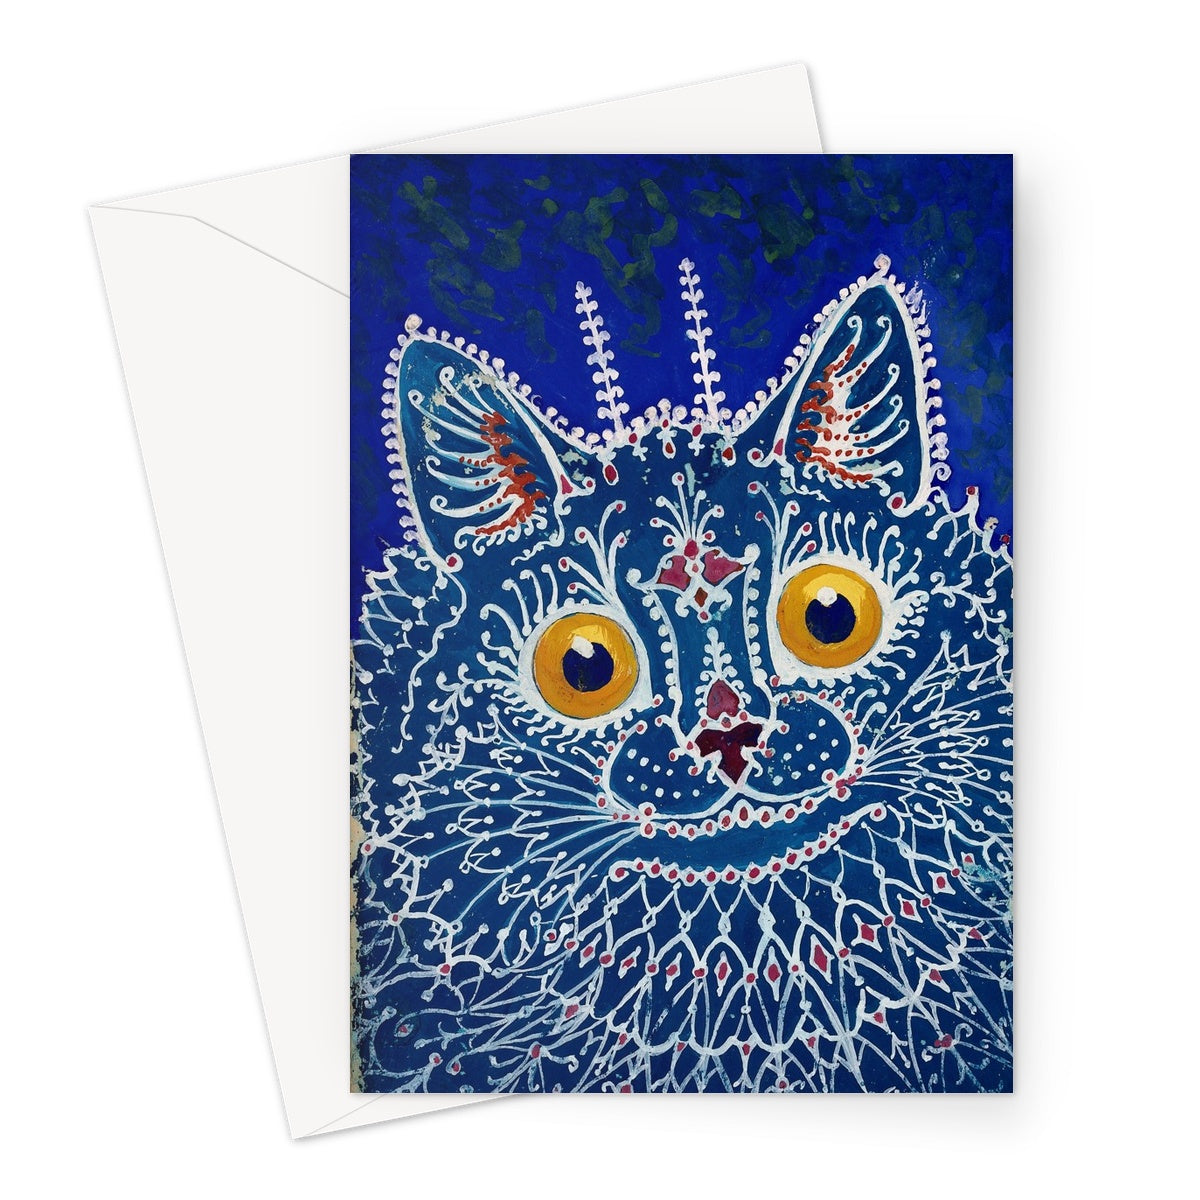 Cat in 'Gothic Style' by Louis Wain - 1925 Greeting Card